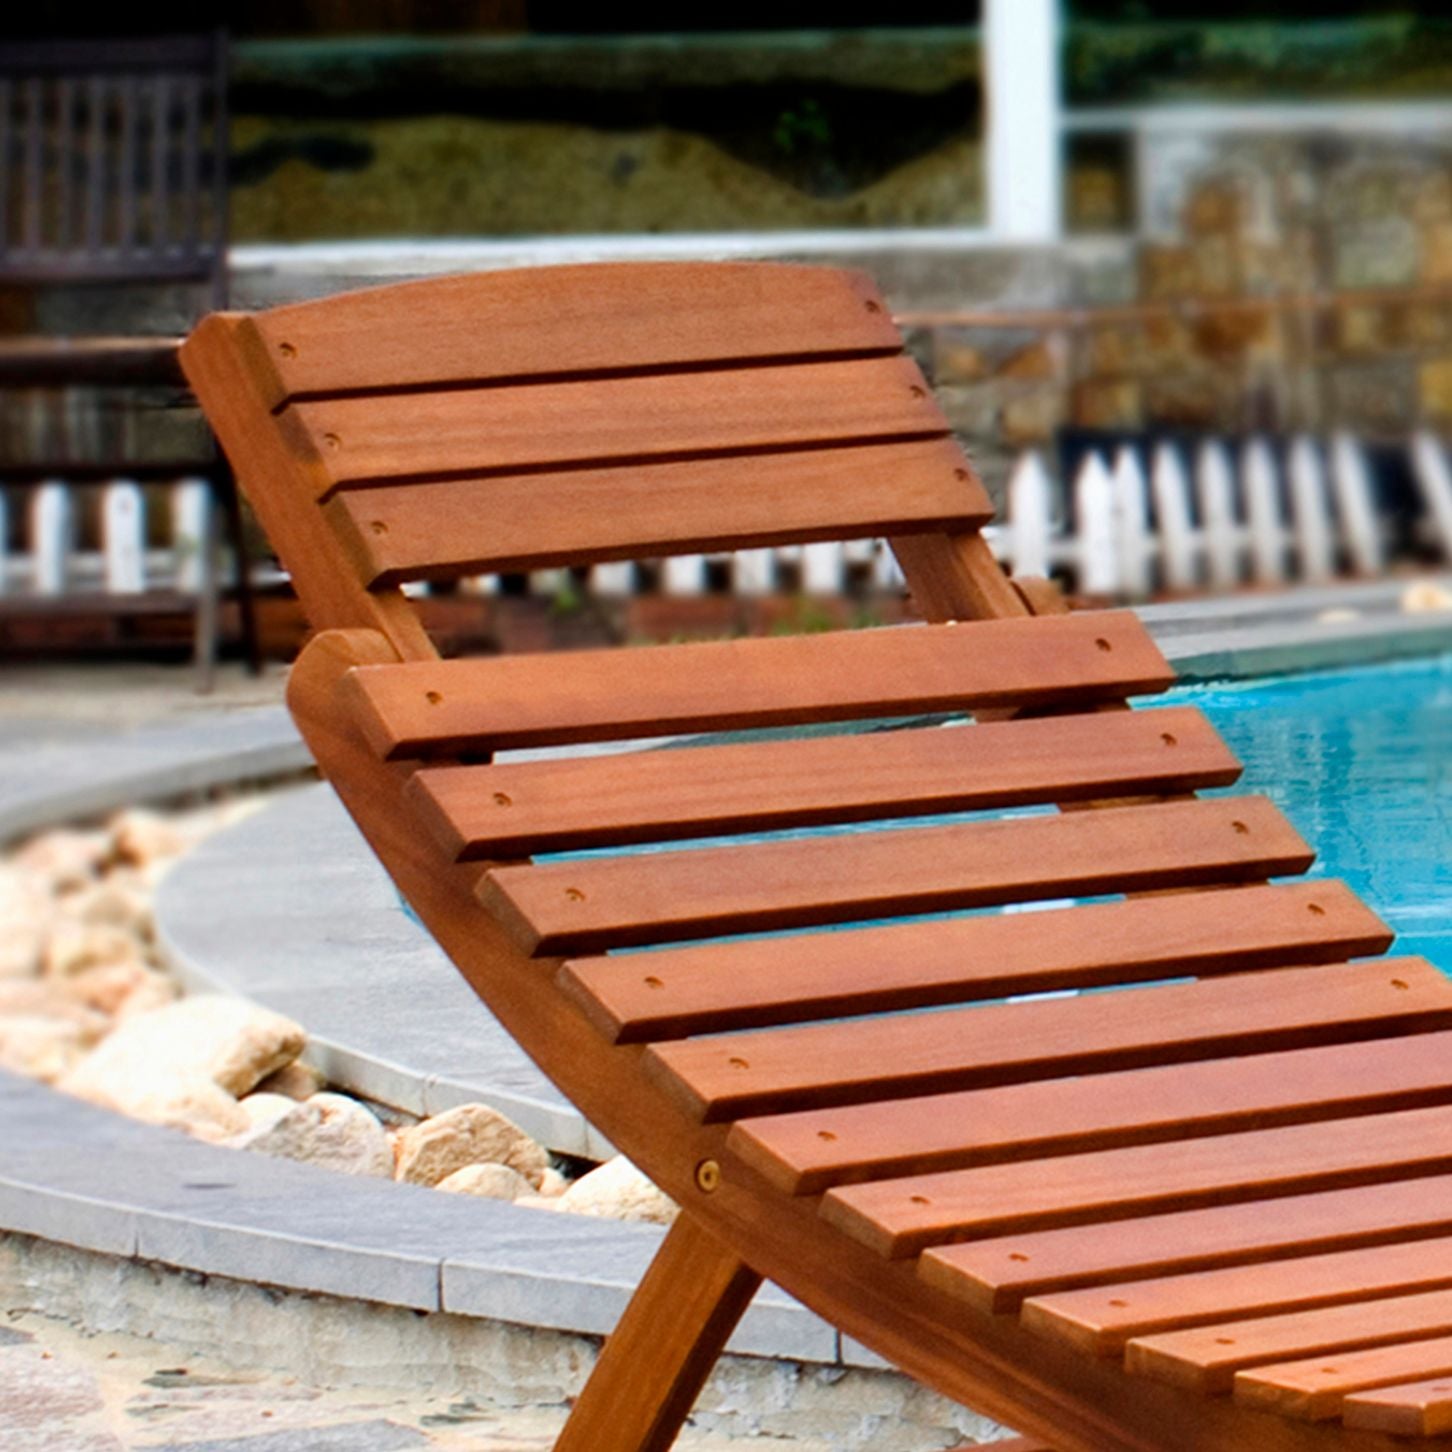 Curved Folding Chaise Lounger